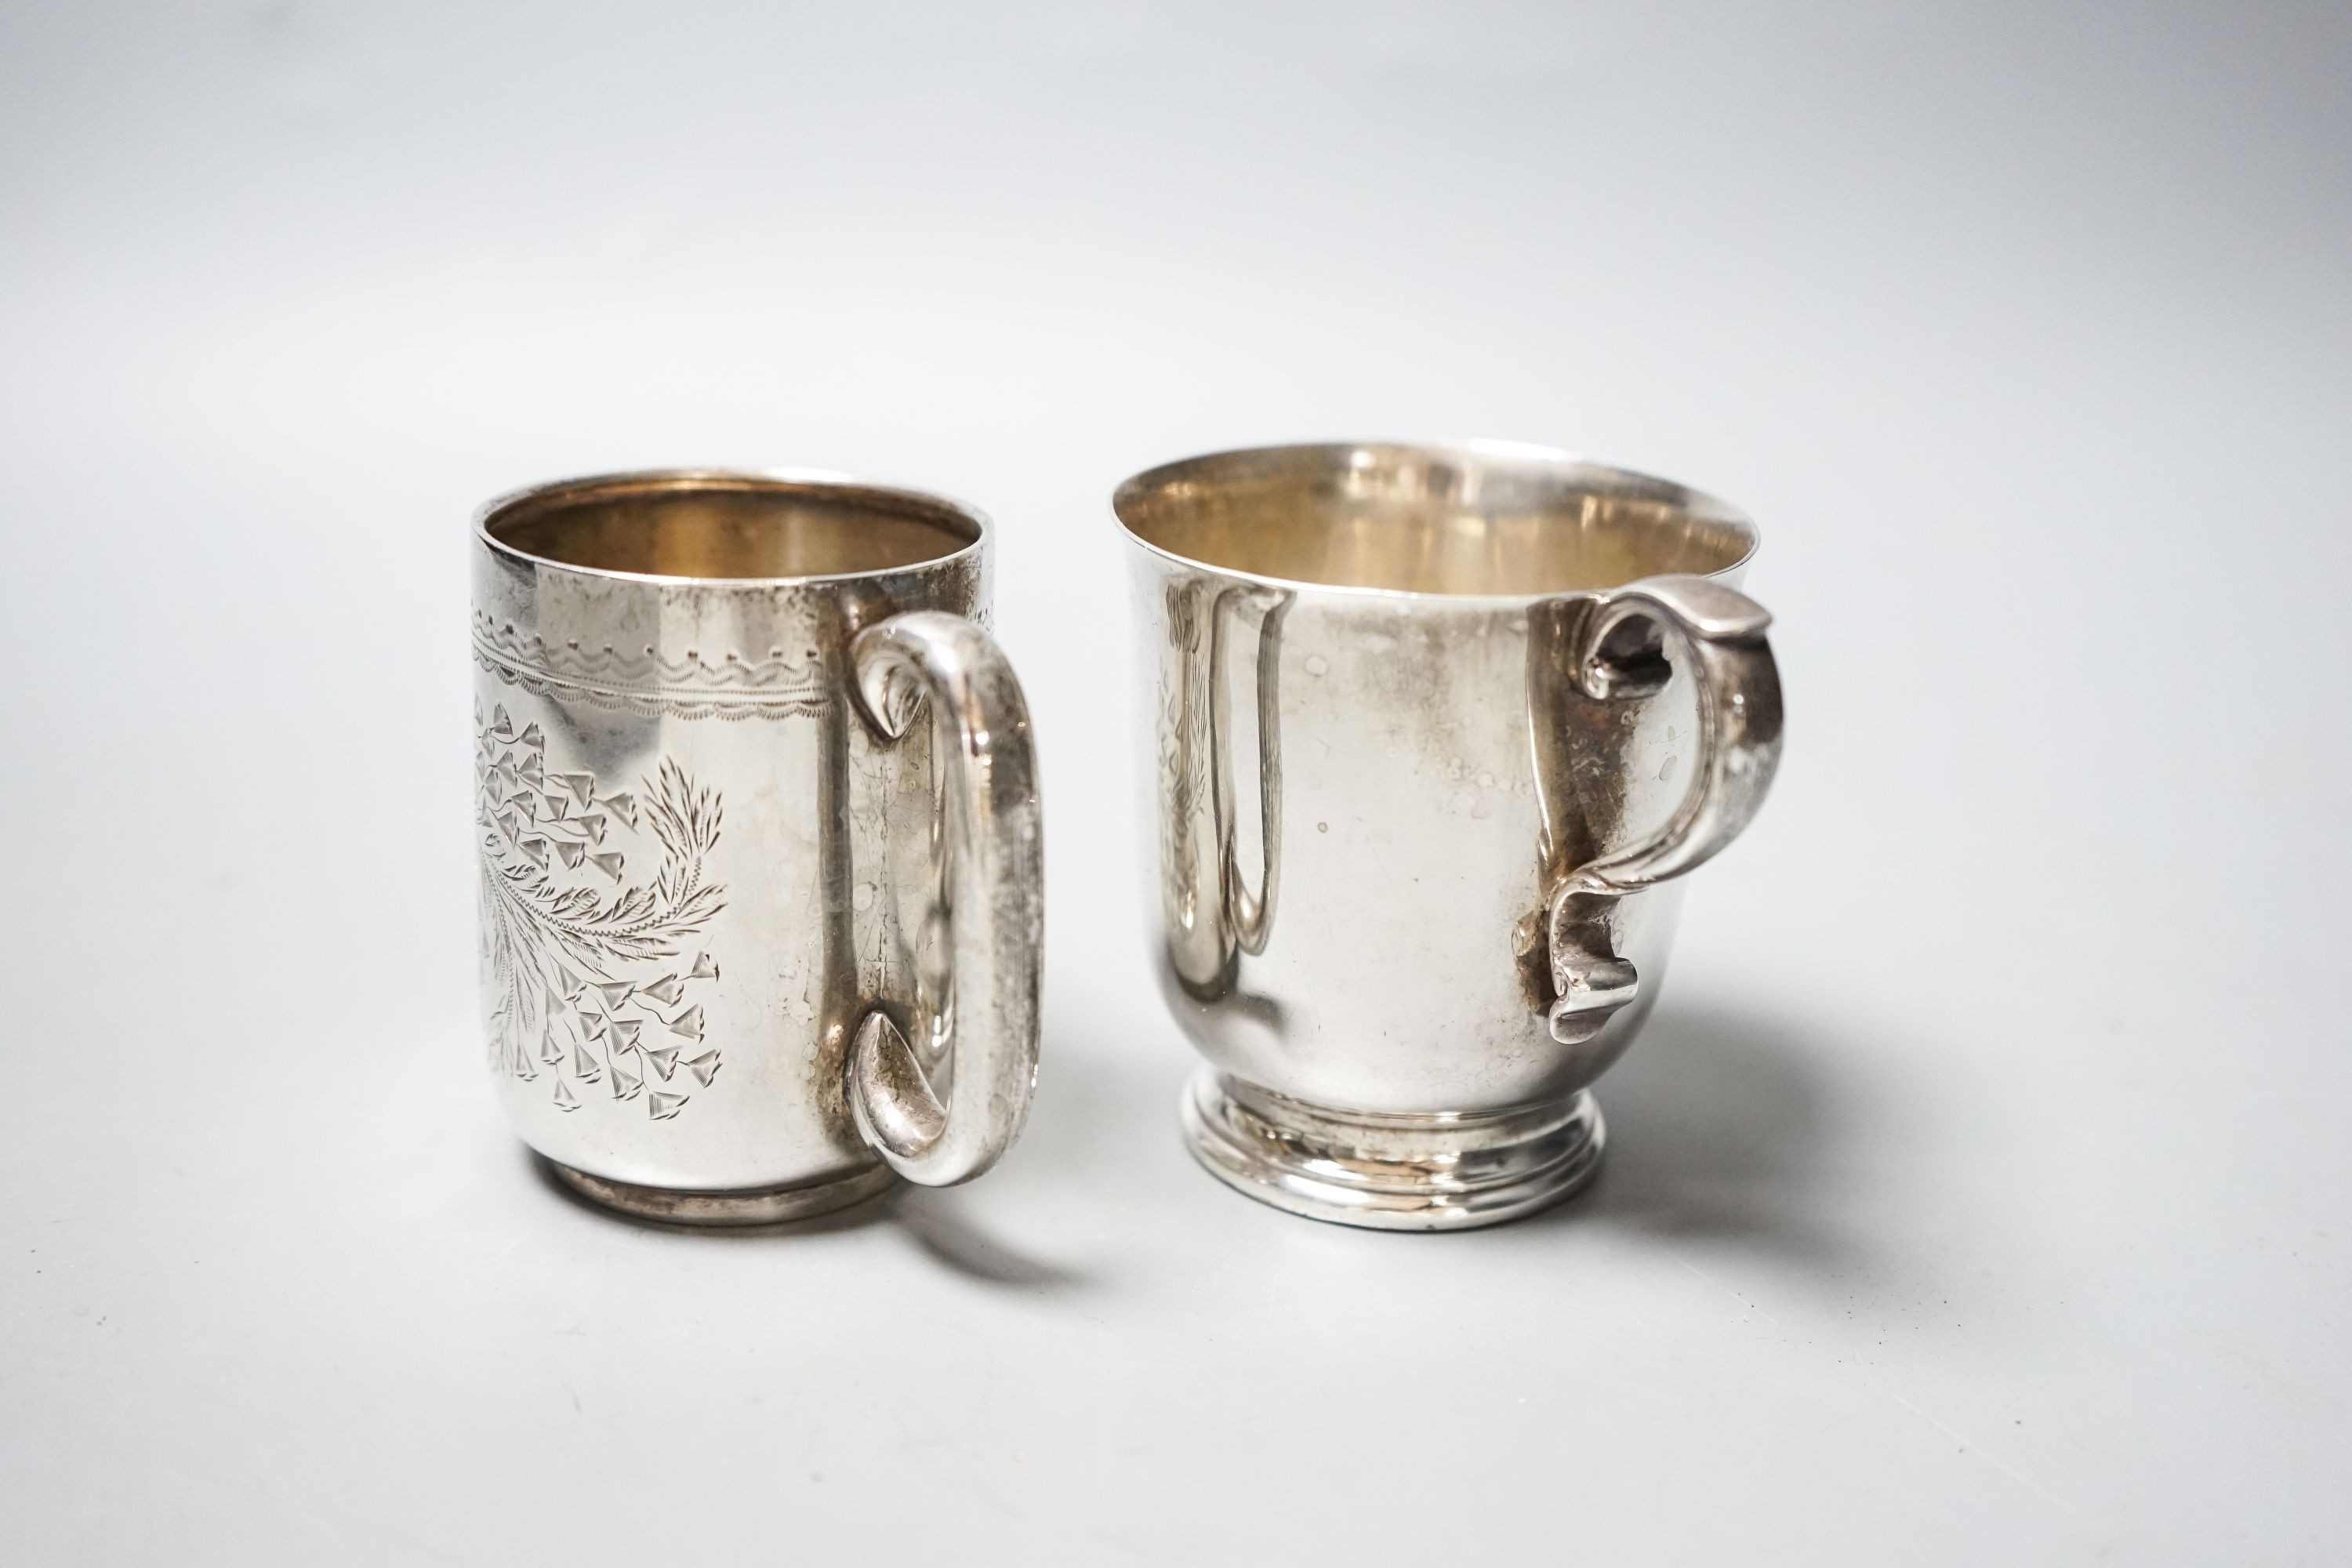 An Edwardian engraved silver christening mug, Chester, 1906, 73mm and a later silver mug, 6.5oz.